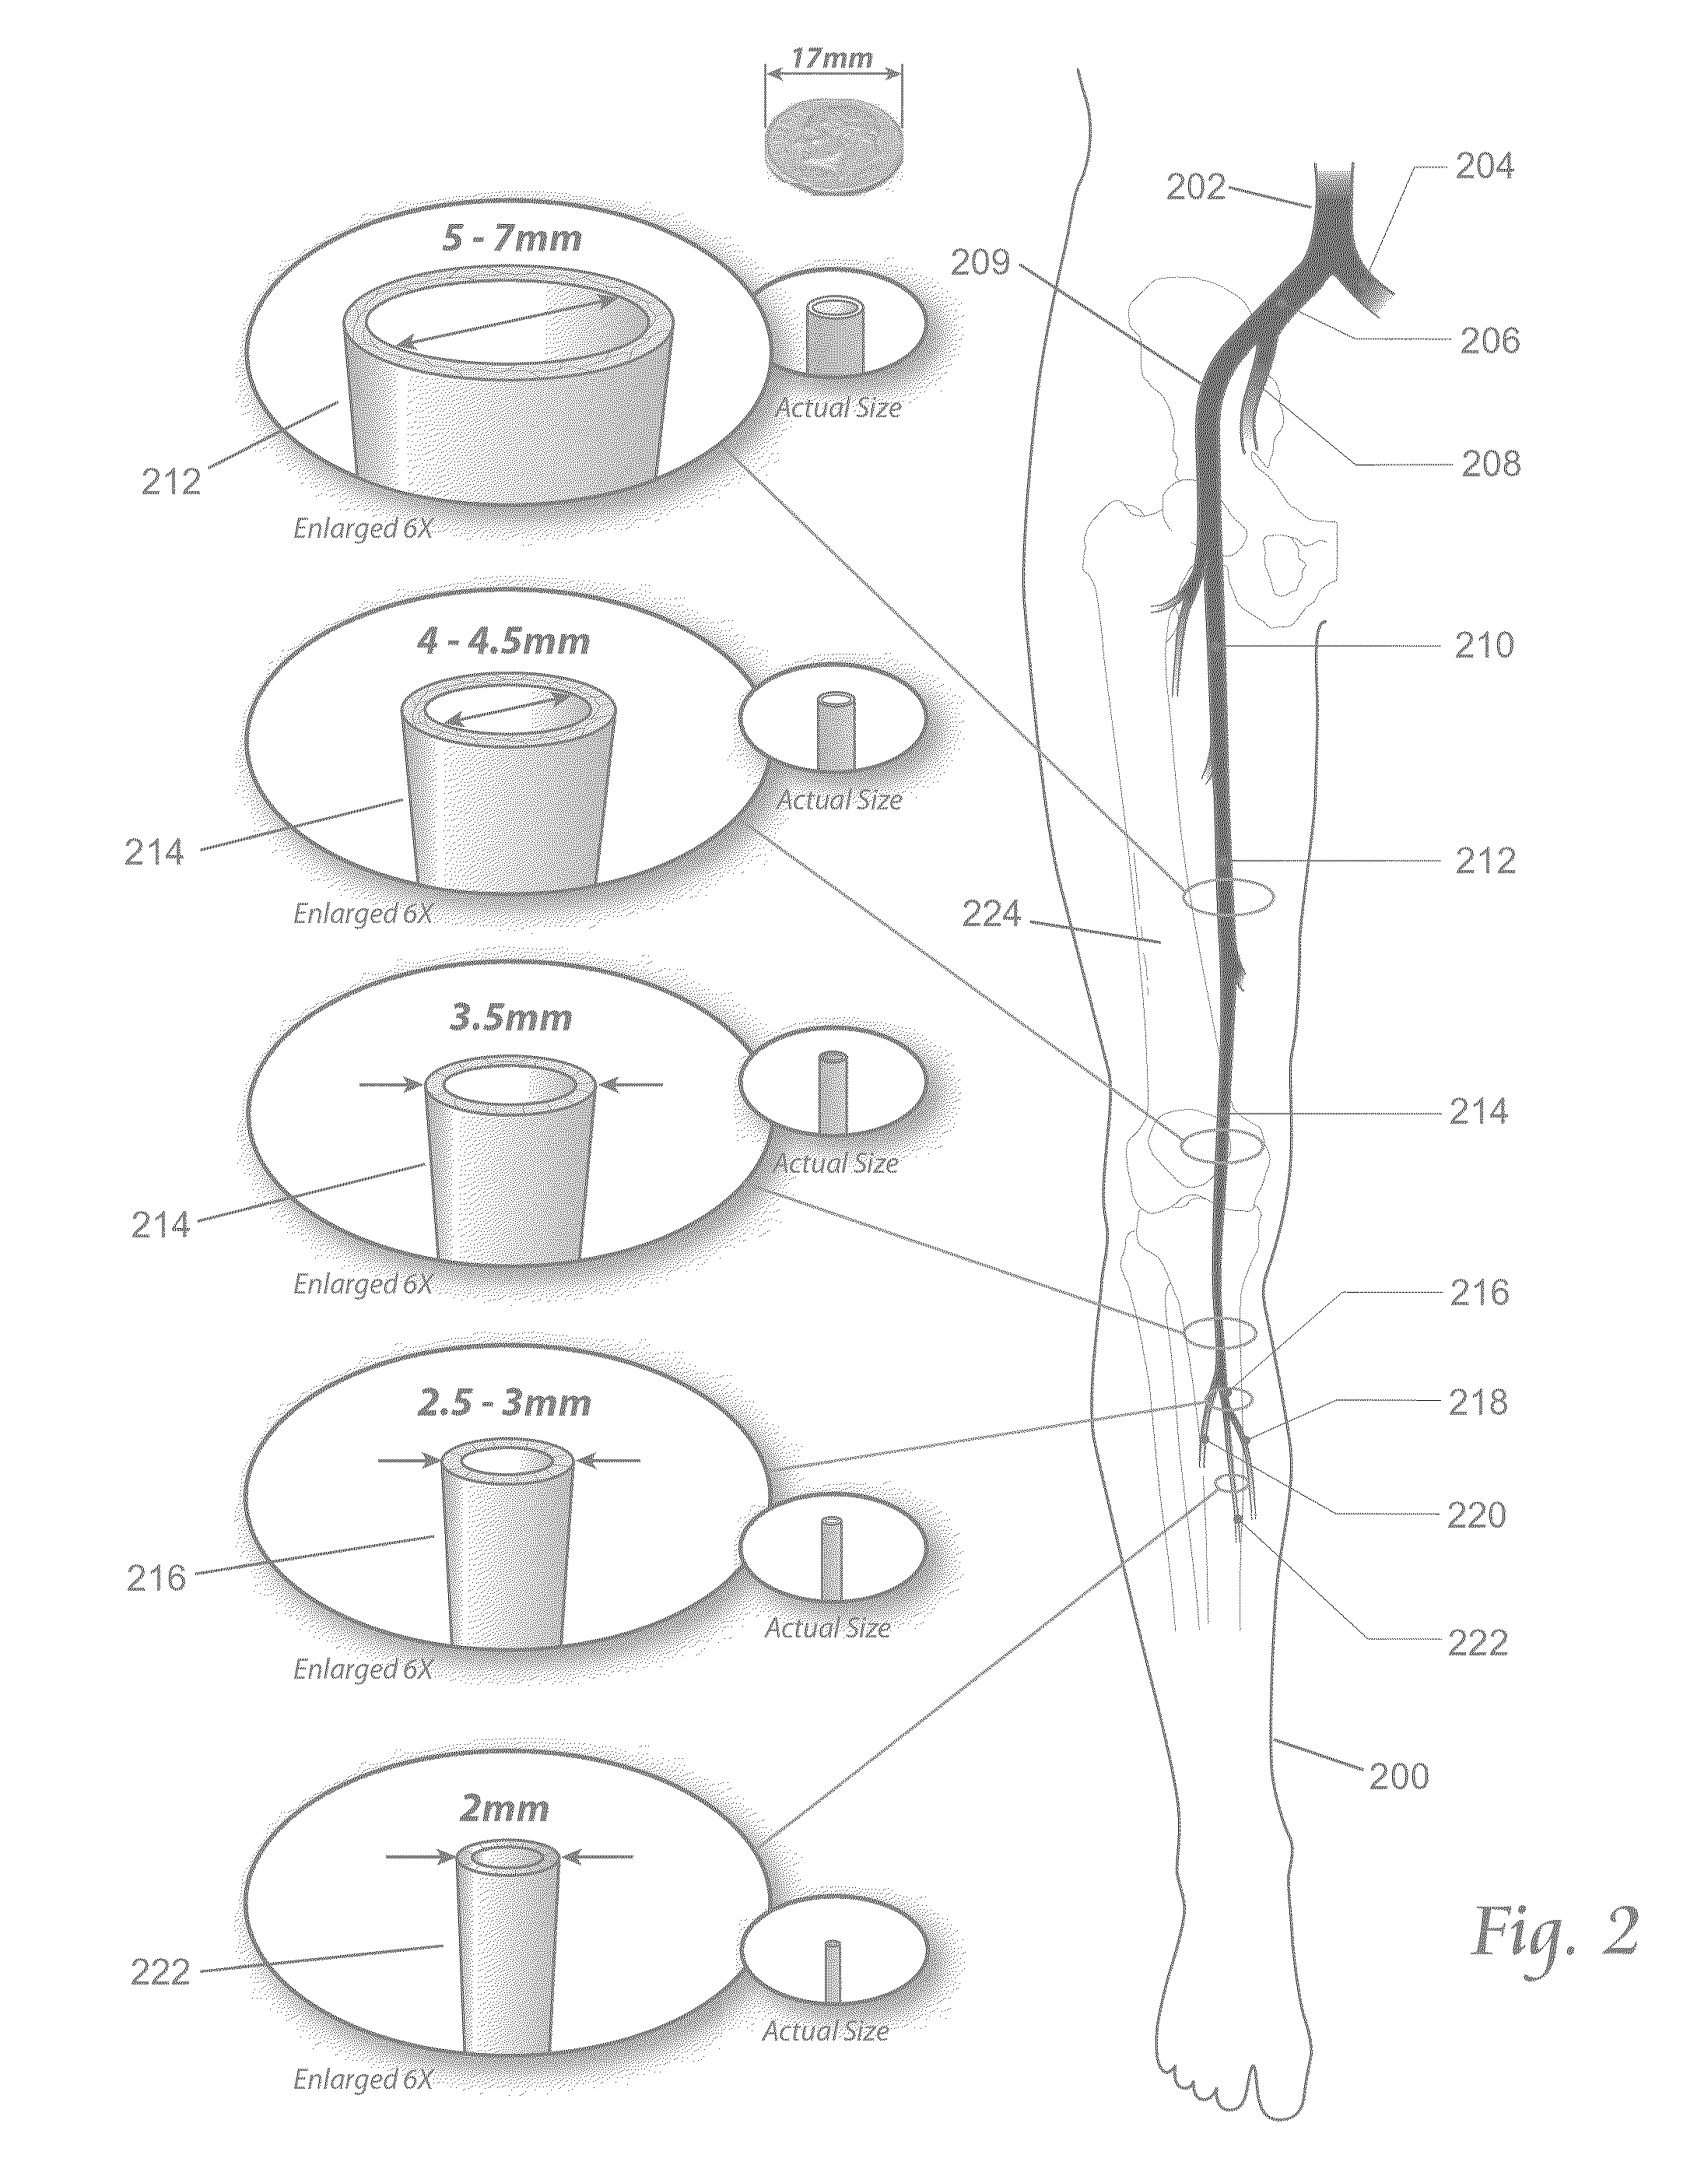 Atherectomy apparatus, systems and methods